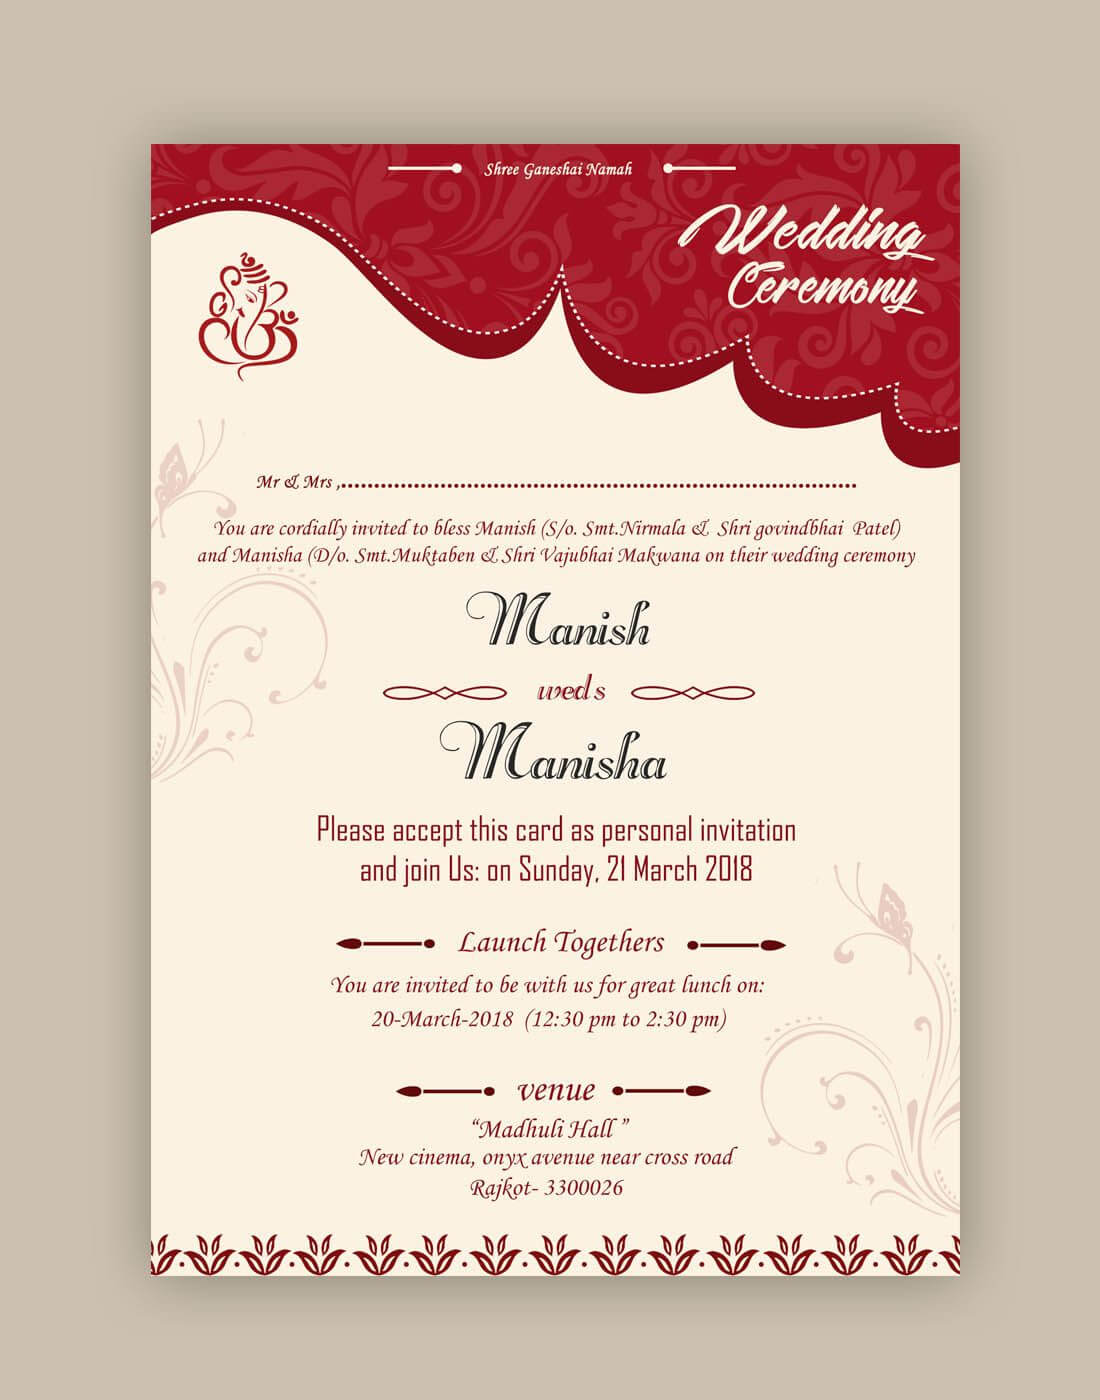 Free Wedding Card Psd Templates In 2020 | Marriage Cards In Indian Wedding Cards Design Templates